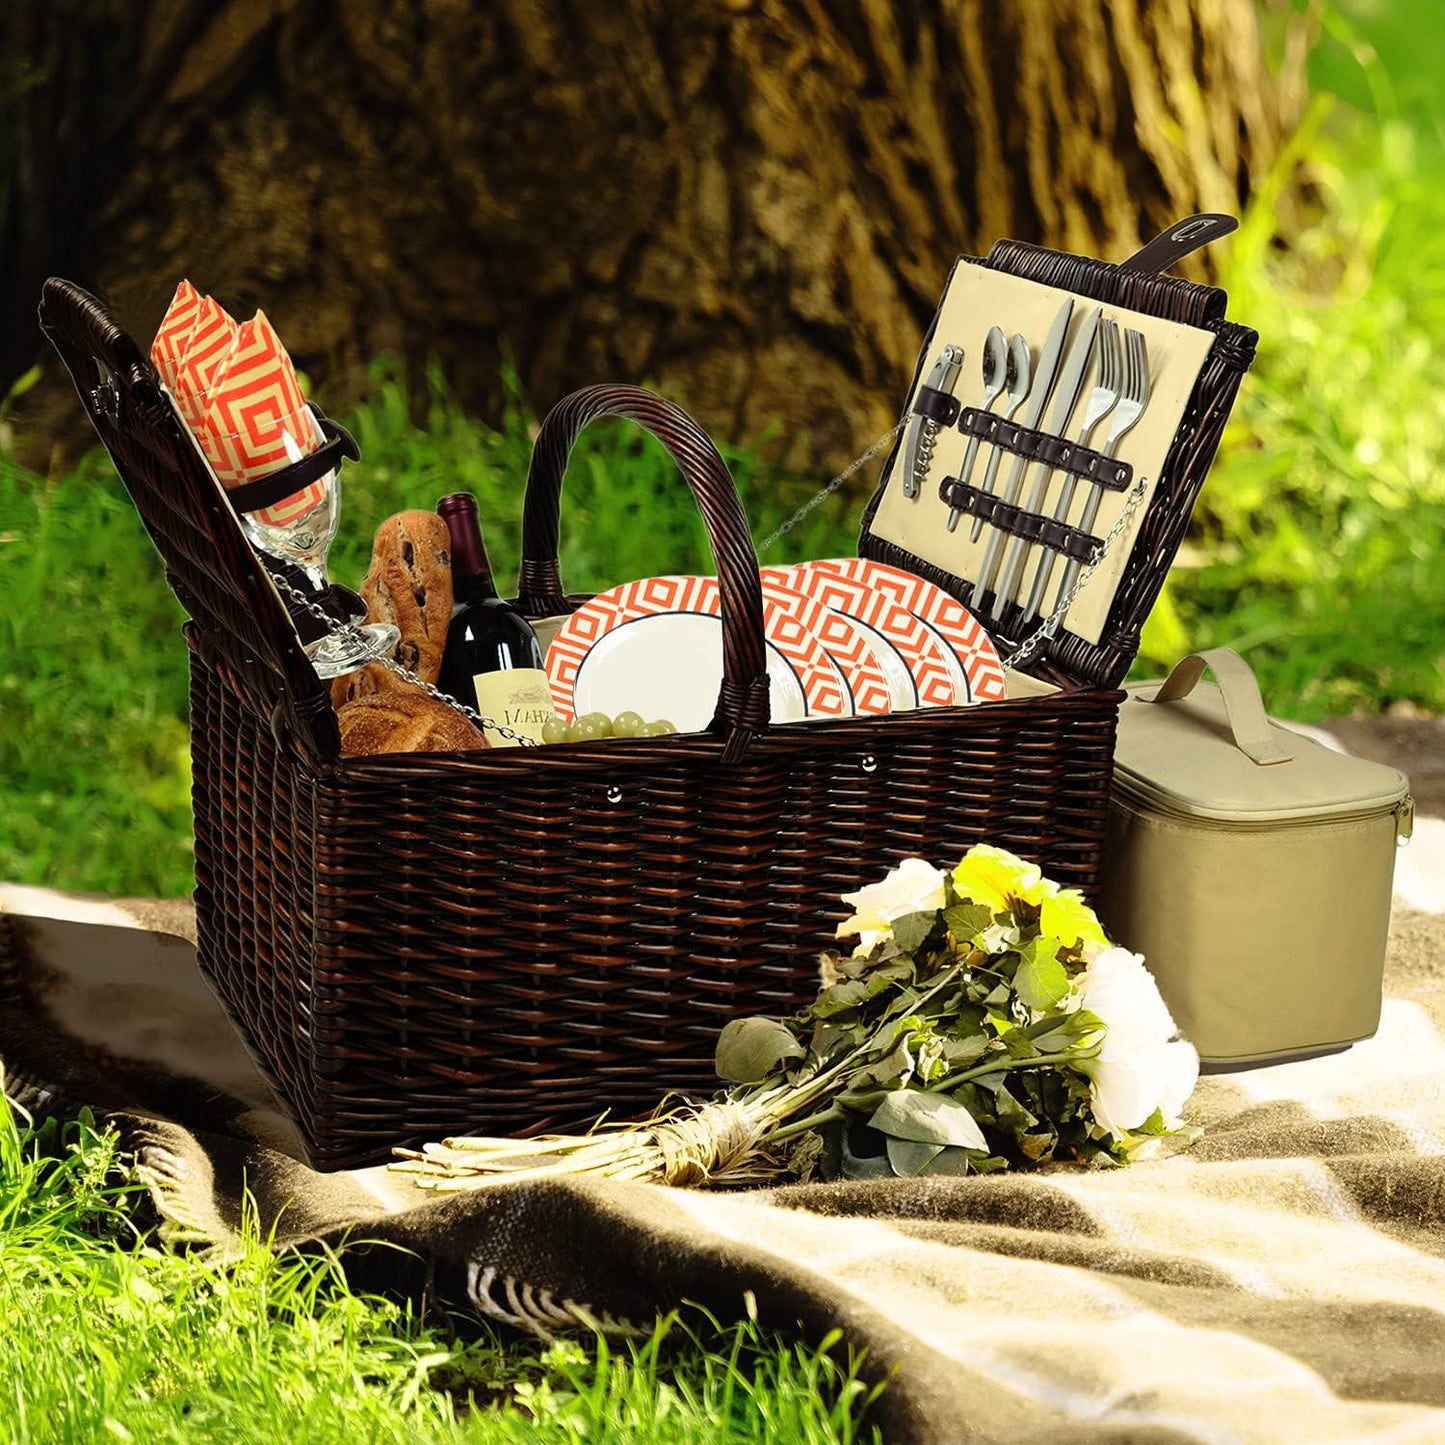 Picnic at Ascot Buckingham Willow Picnic Basket With Blanket And Coffee Service, Brown Wicker/Diamond Orange